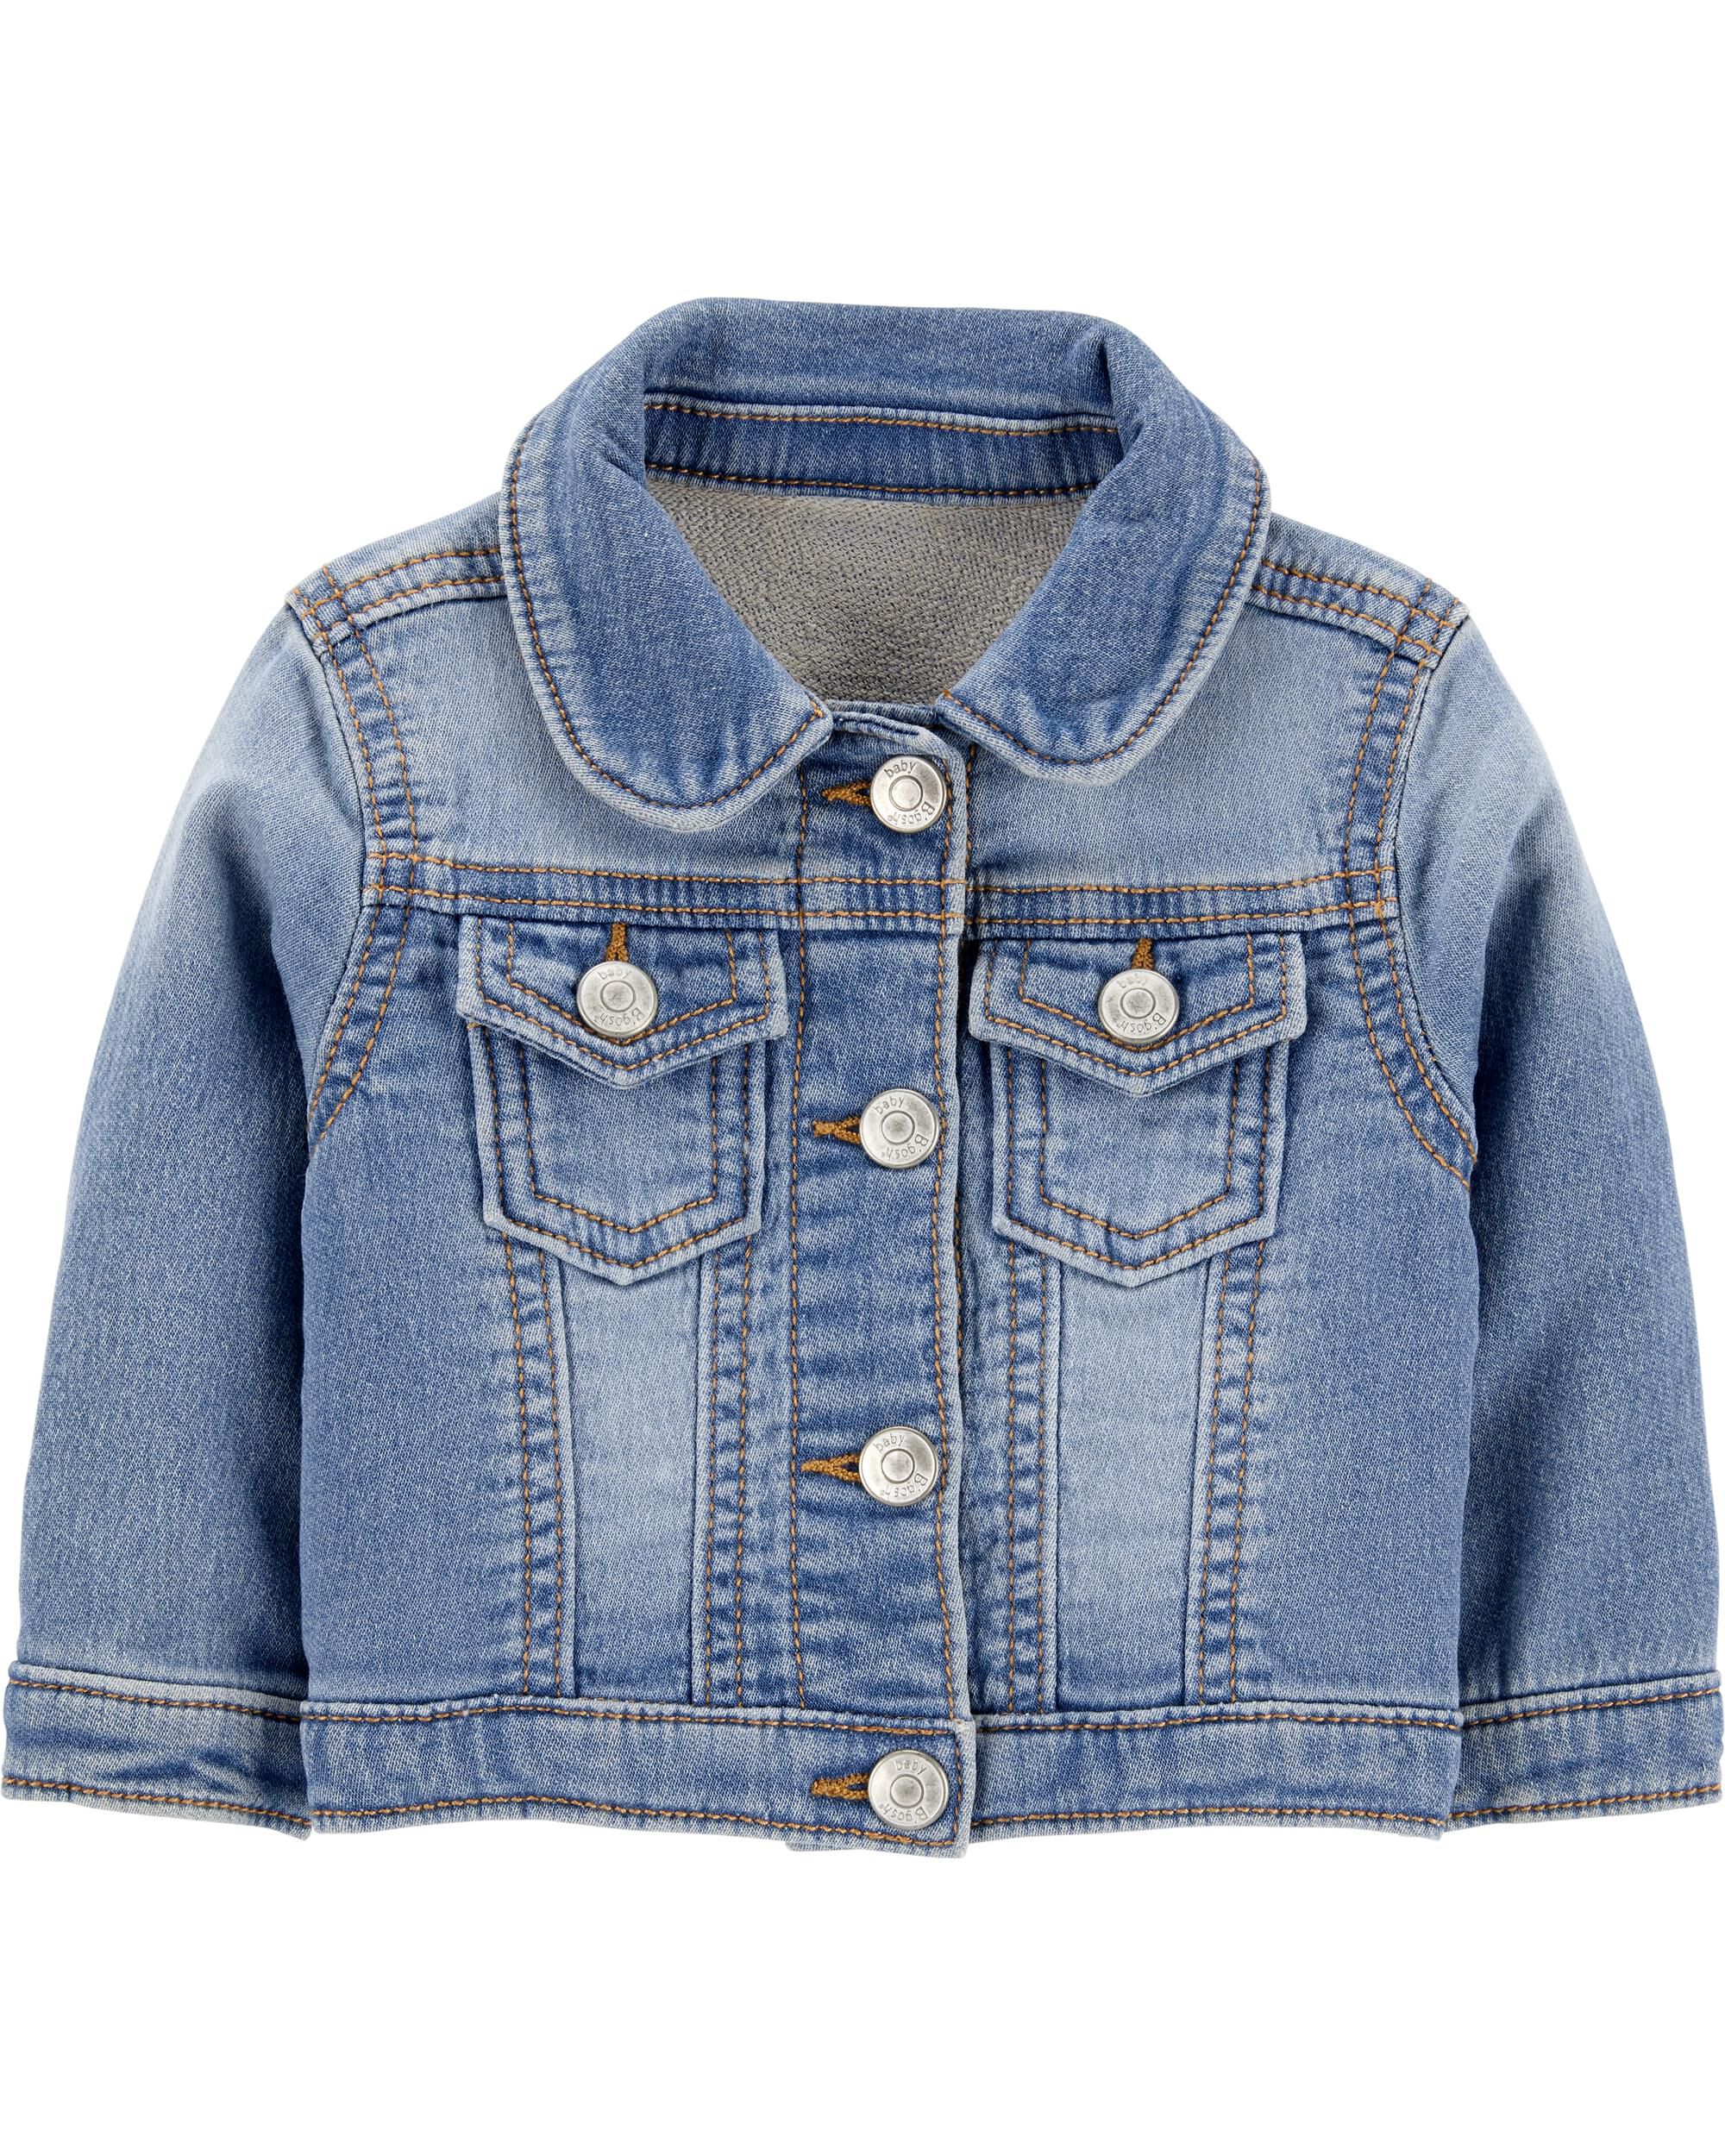 carter's jackets for babies